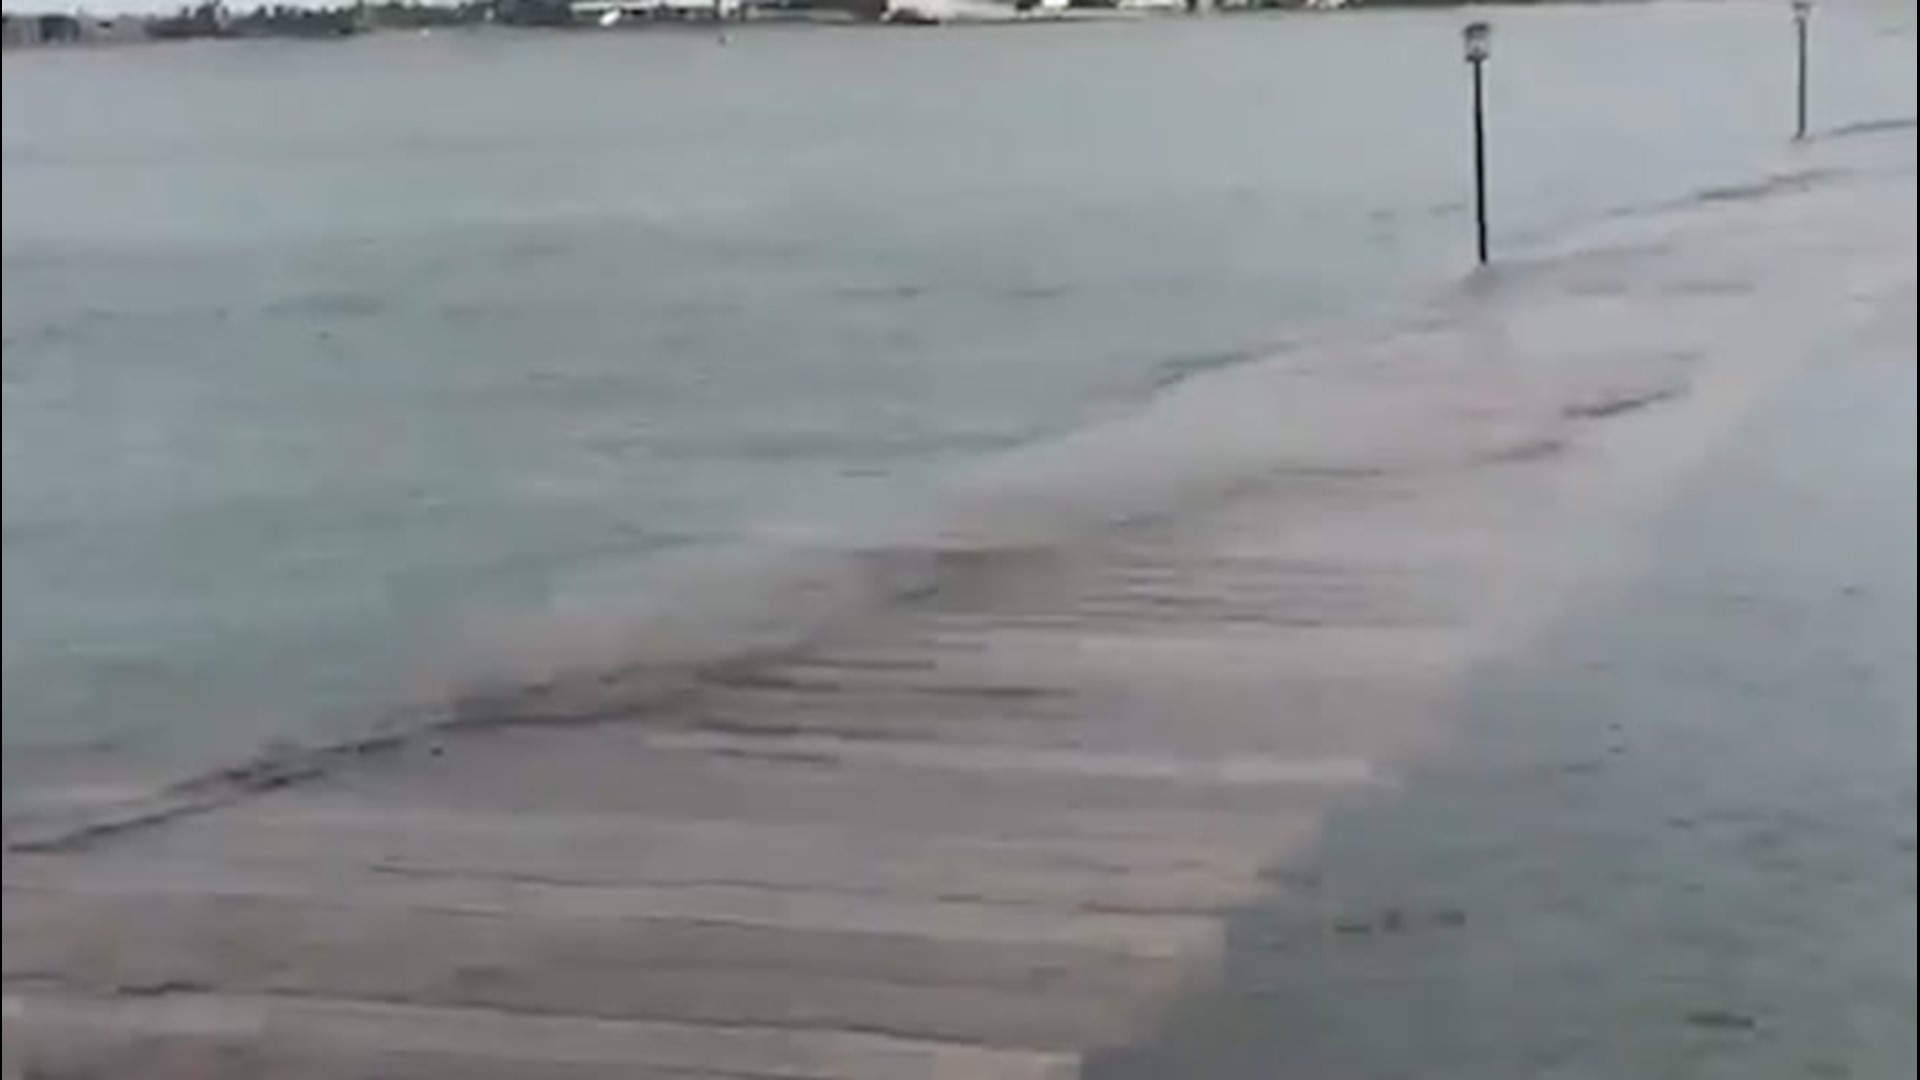 Coastal flooding hit the city of Galveston, Texas, hard on Sept. 19, resulting in this pier becoming completely covered in water.